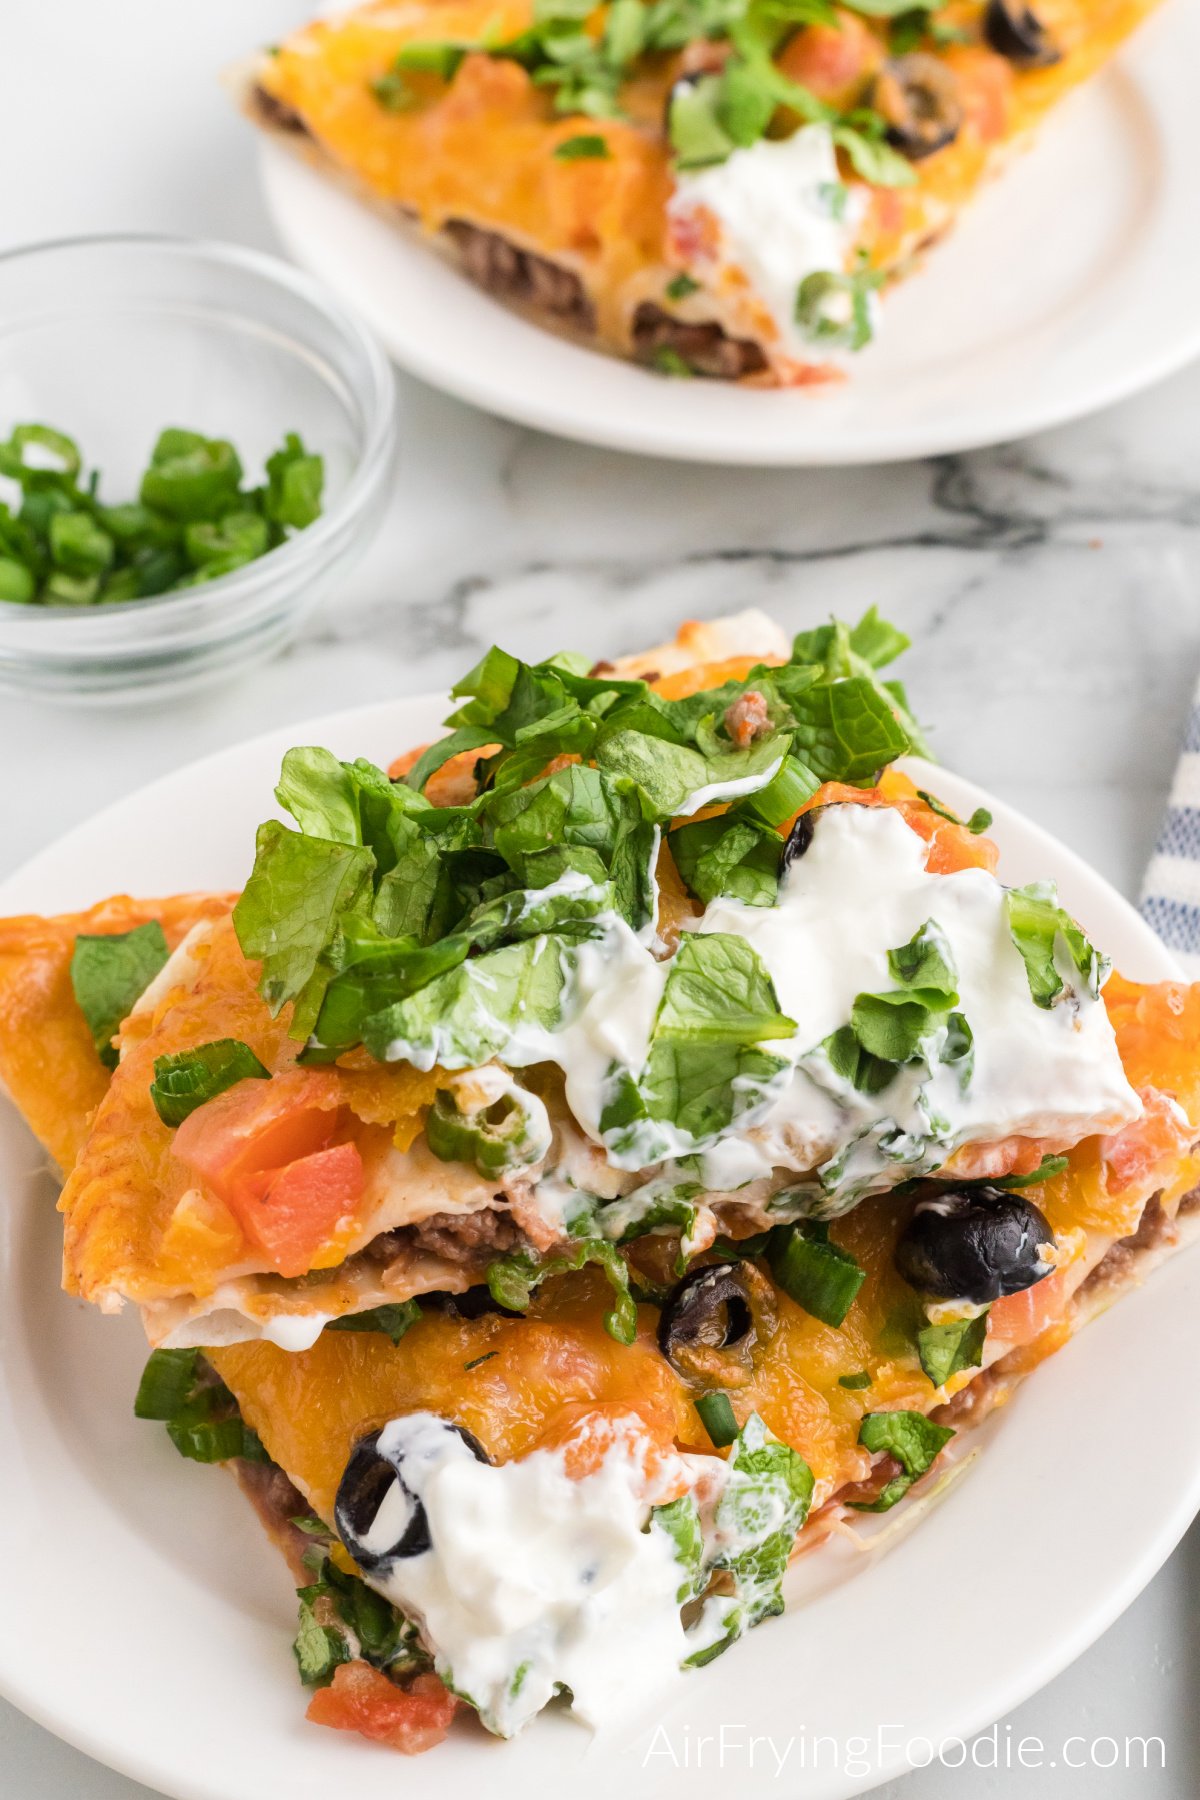 Sliced mexican pizza topped with lettuce and sour cream and ready to eat.